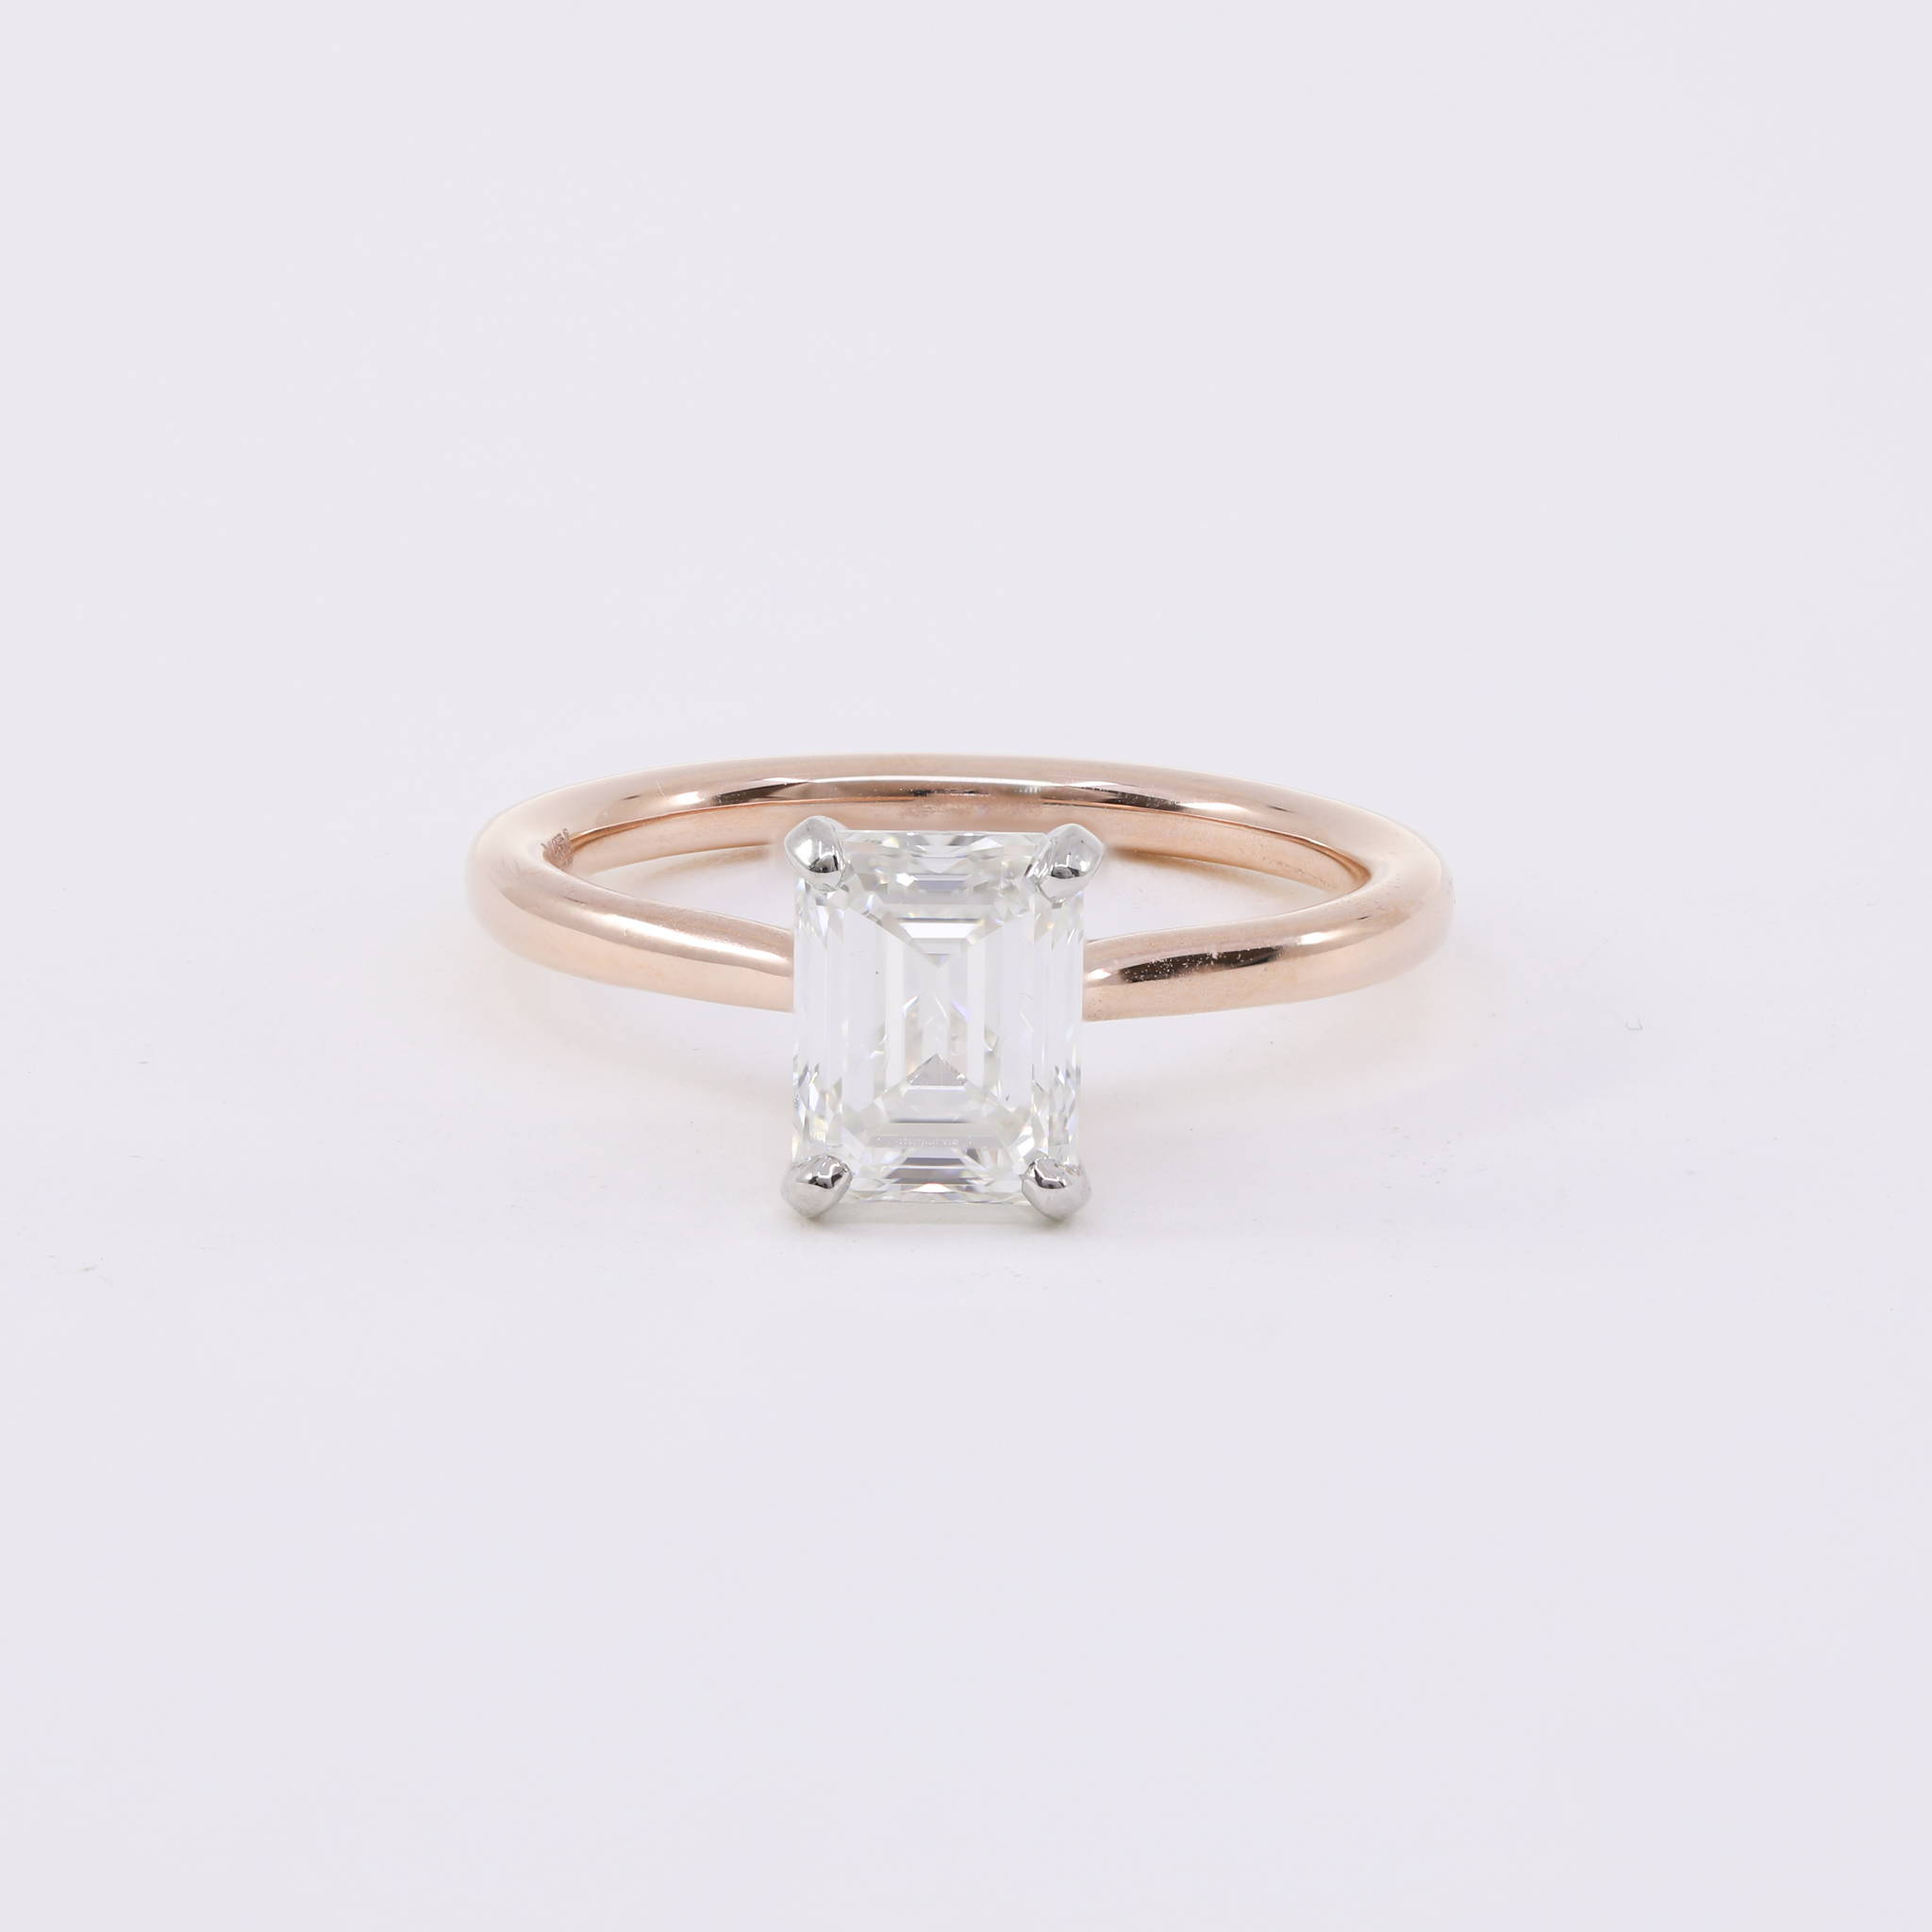 14k rose gold solitaire engagement ring with an emerald-cut diamond